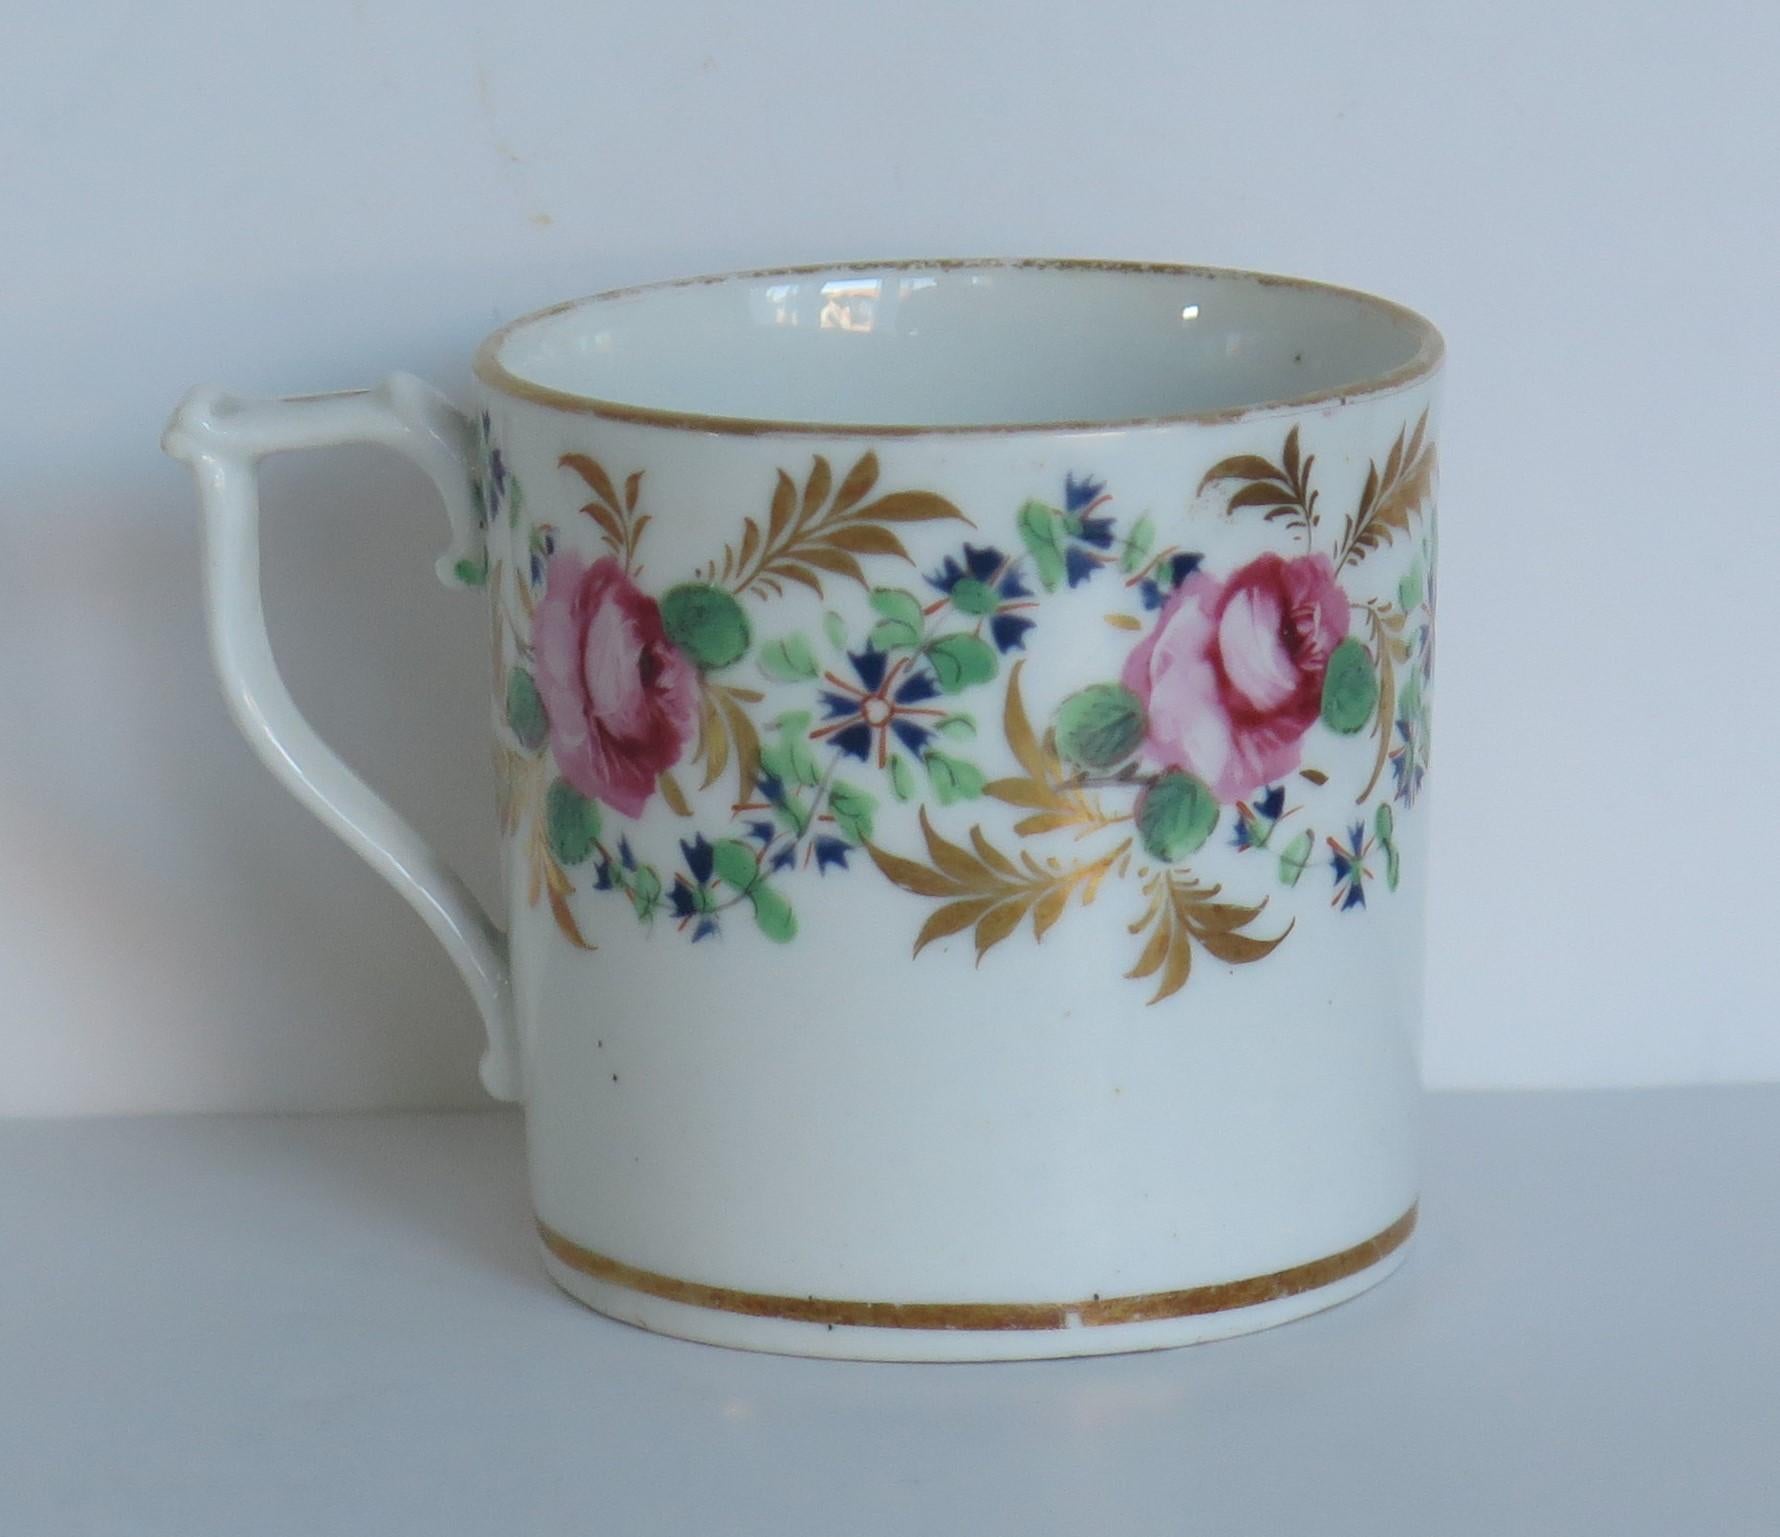 This is a beautiful porcelain Coffee Can by the Derby factory, made during the late Georgian period of the early years of the 19th Century

The cylindrical can tapers slightly to the base and has a wishbone handle.

The decoration is exquisite,